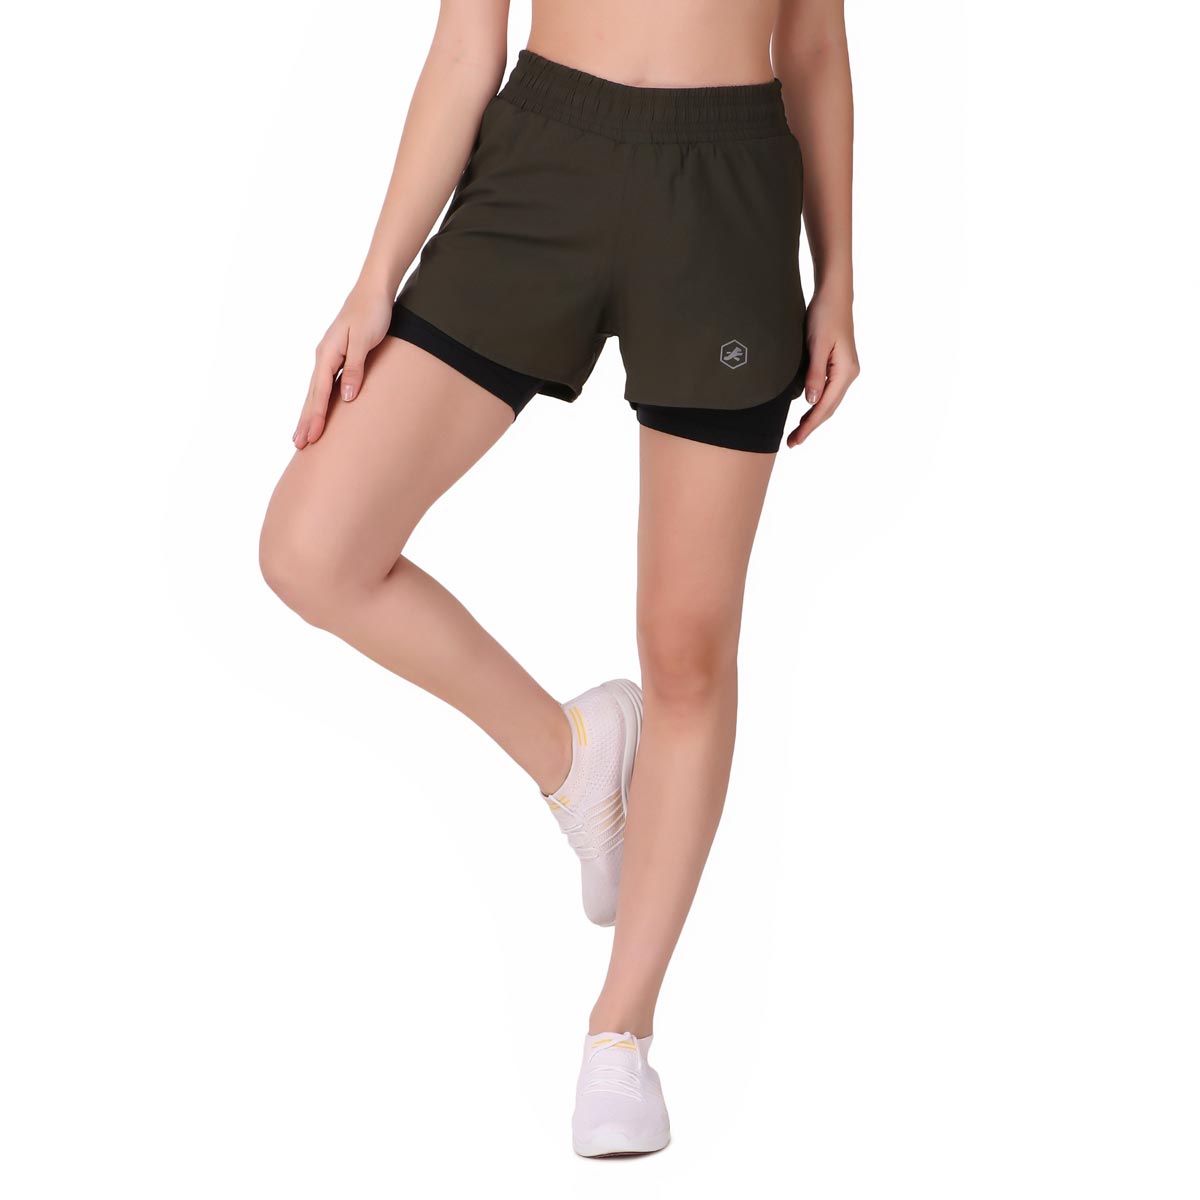 Performance Shorts For Women With Inbuilt Tights (Olive)